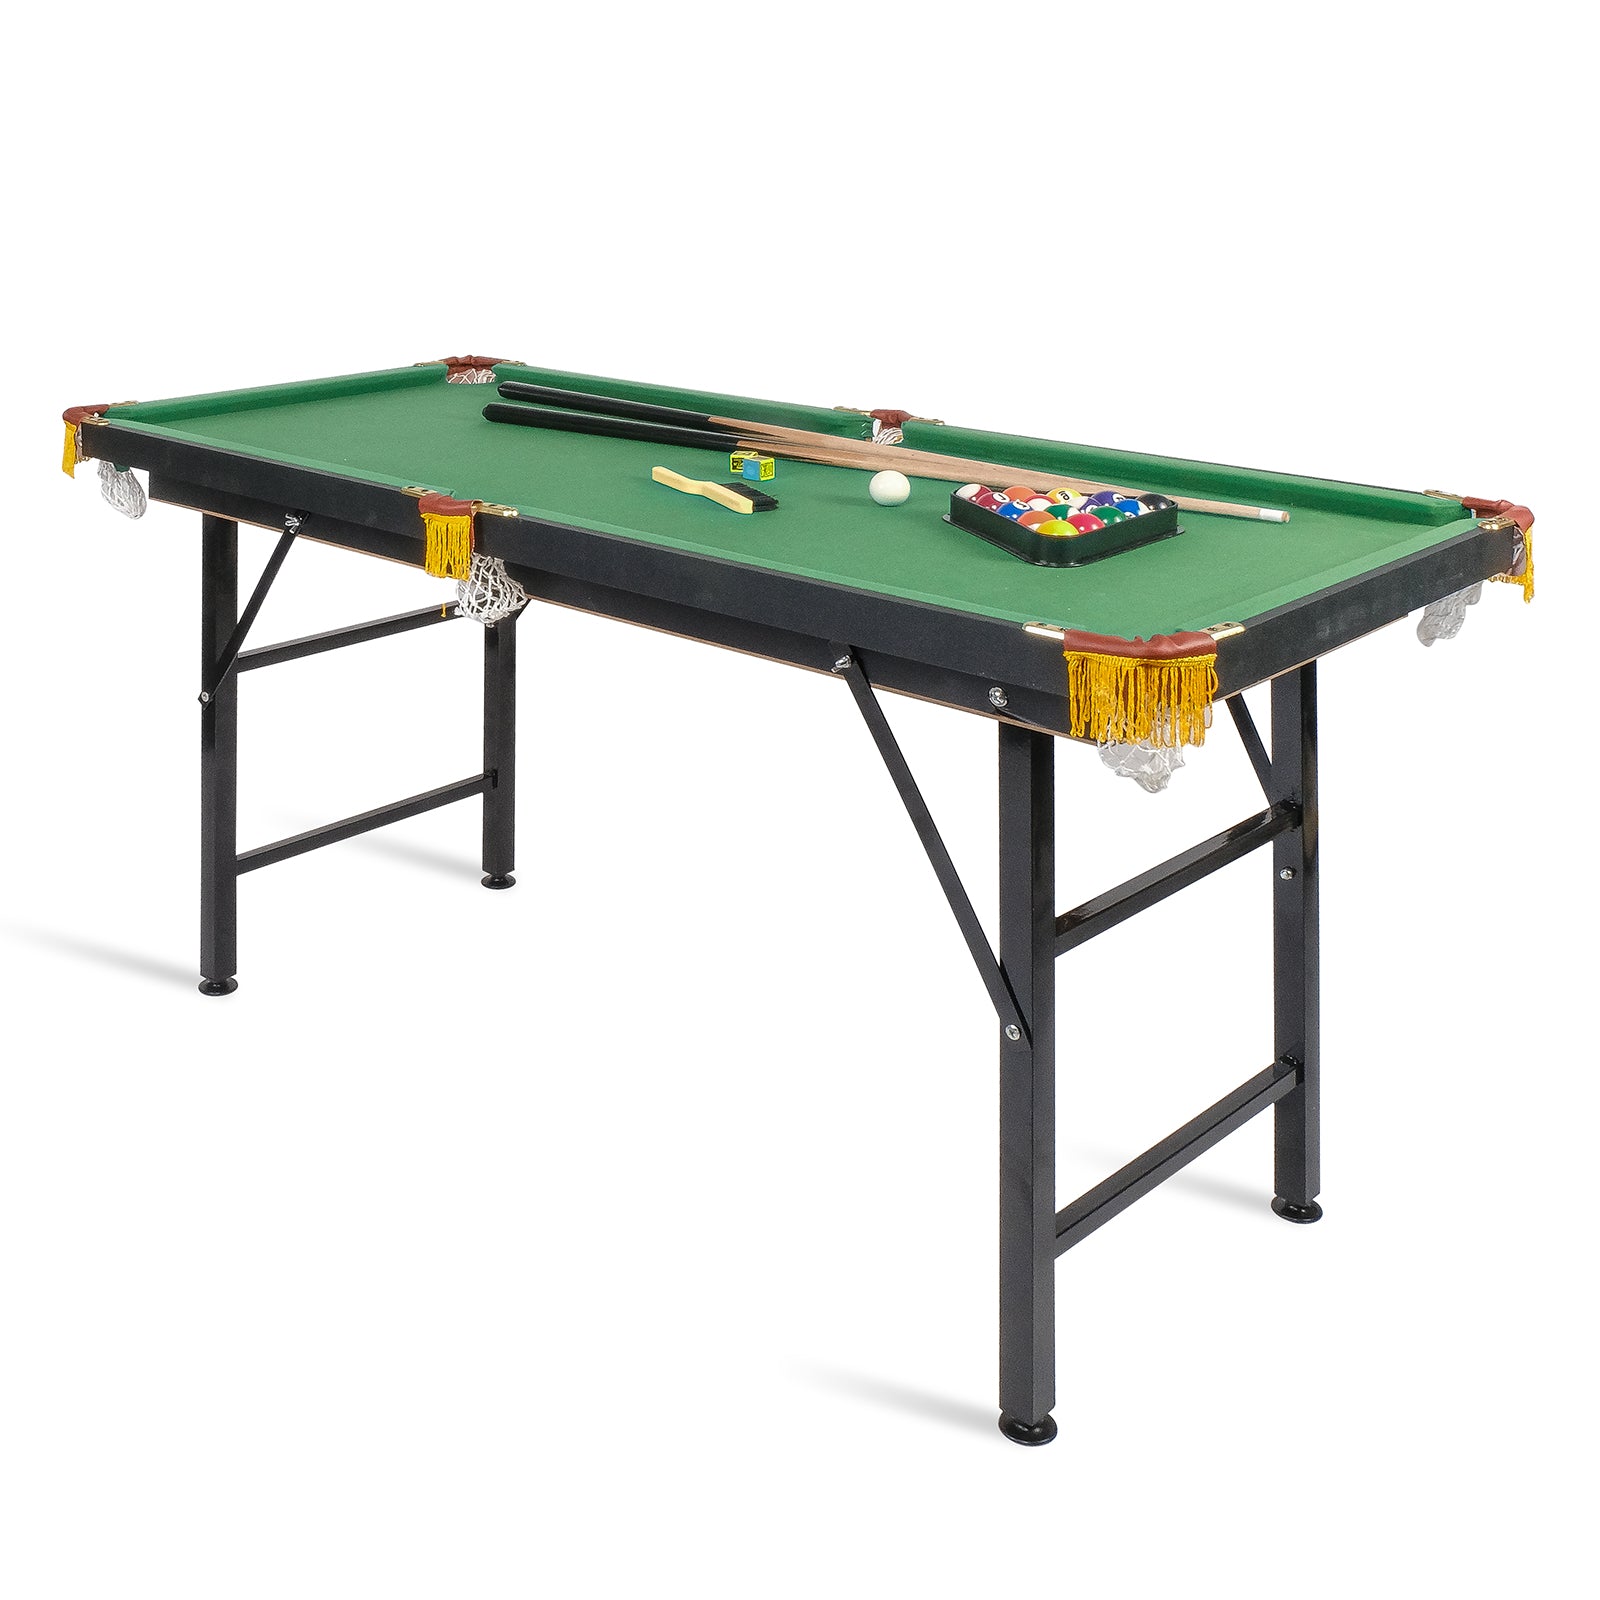 55" Portable Folding Pool Billiard Table Space Saver Game Table for Kids, Green